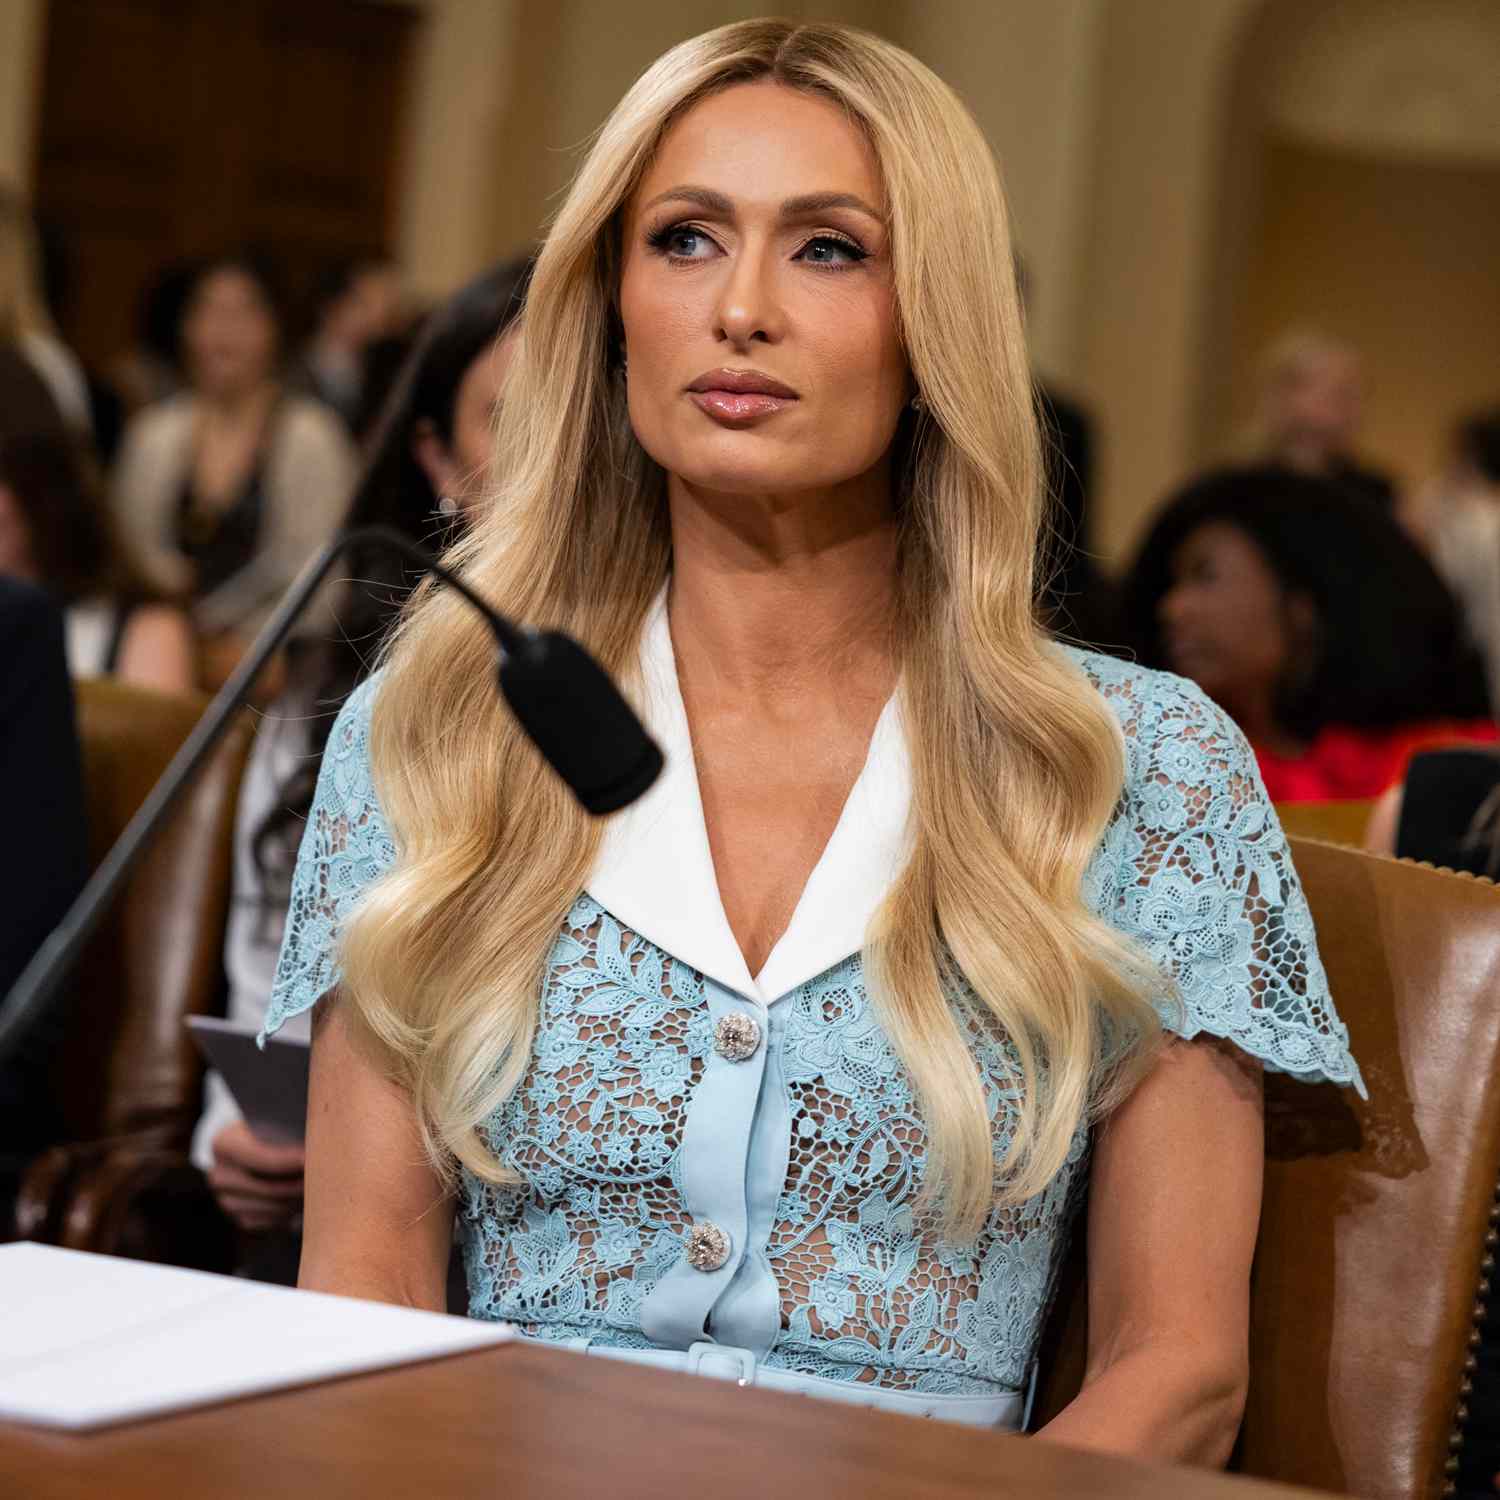 Paris Hilton arrives to testify at the House Committee on Ways and Means hearing 